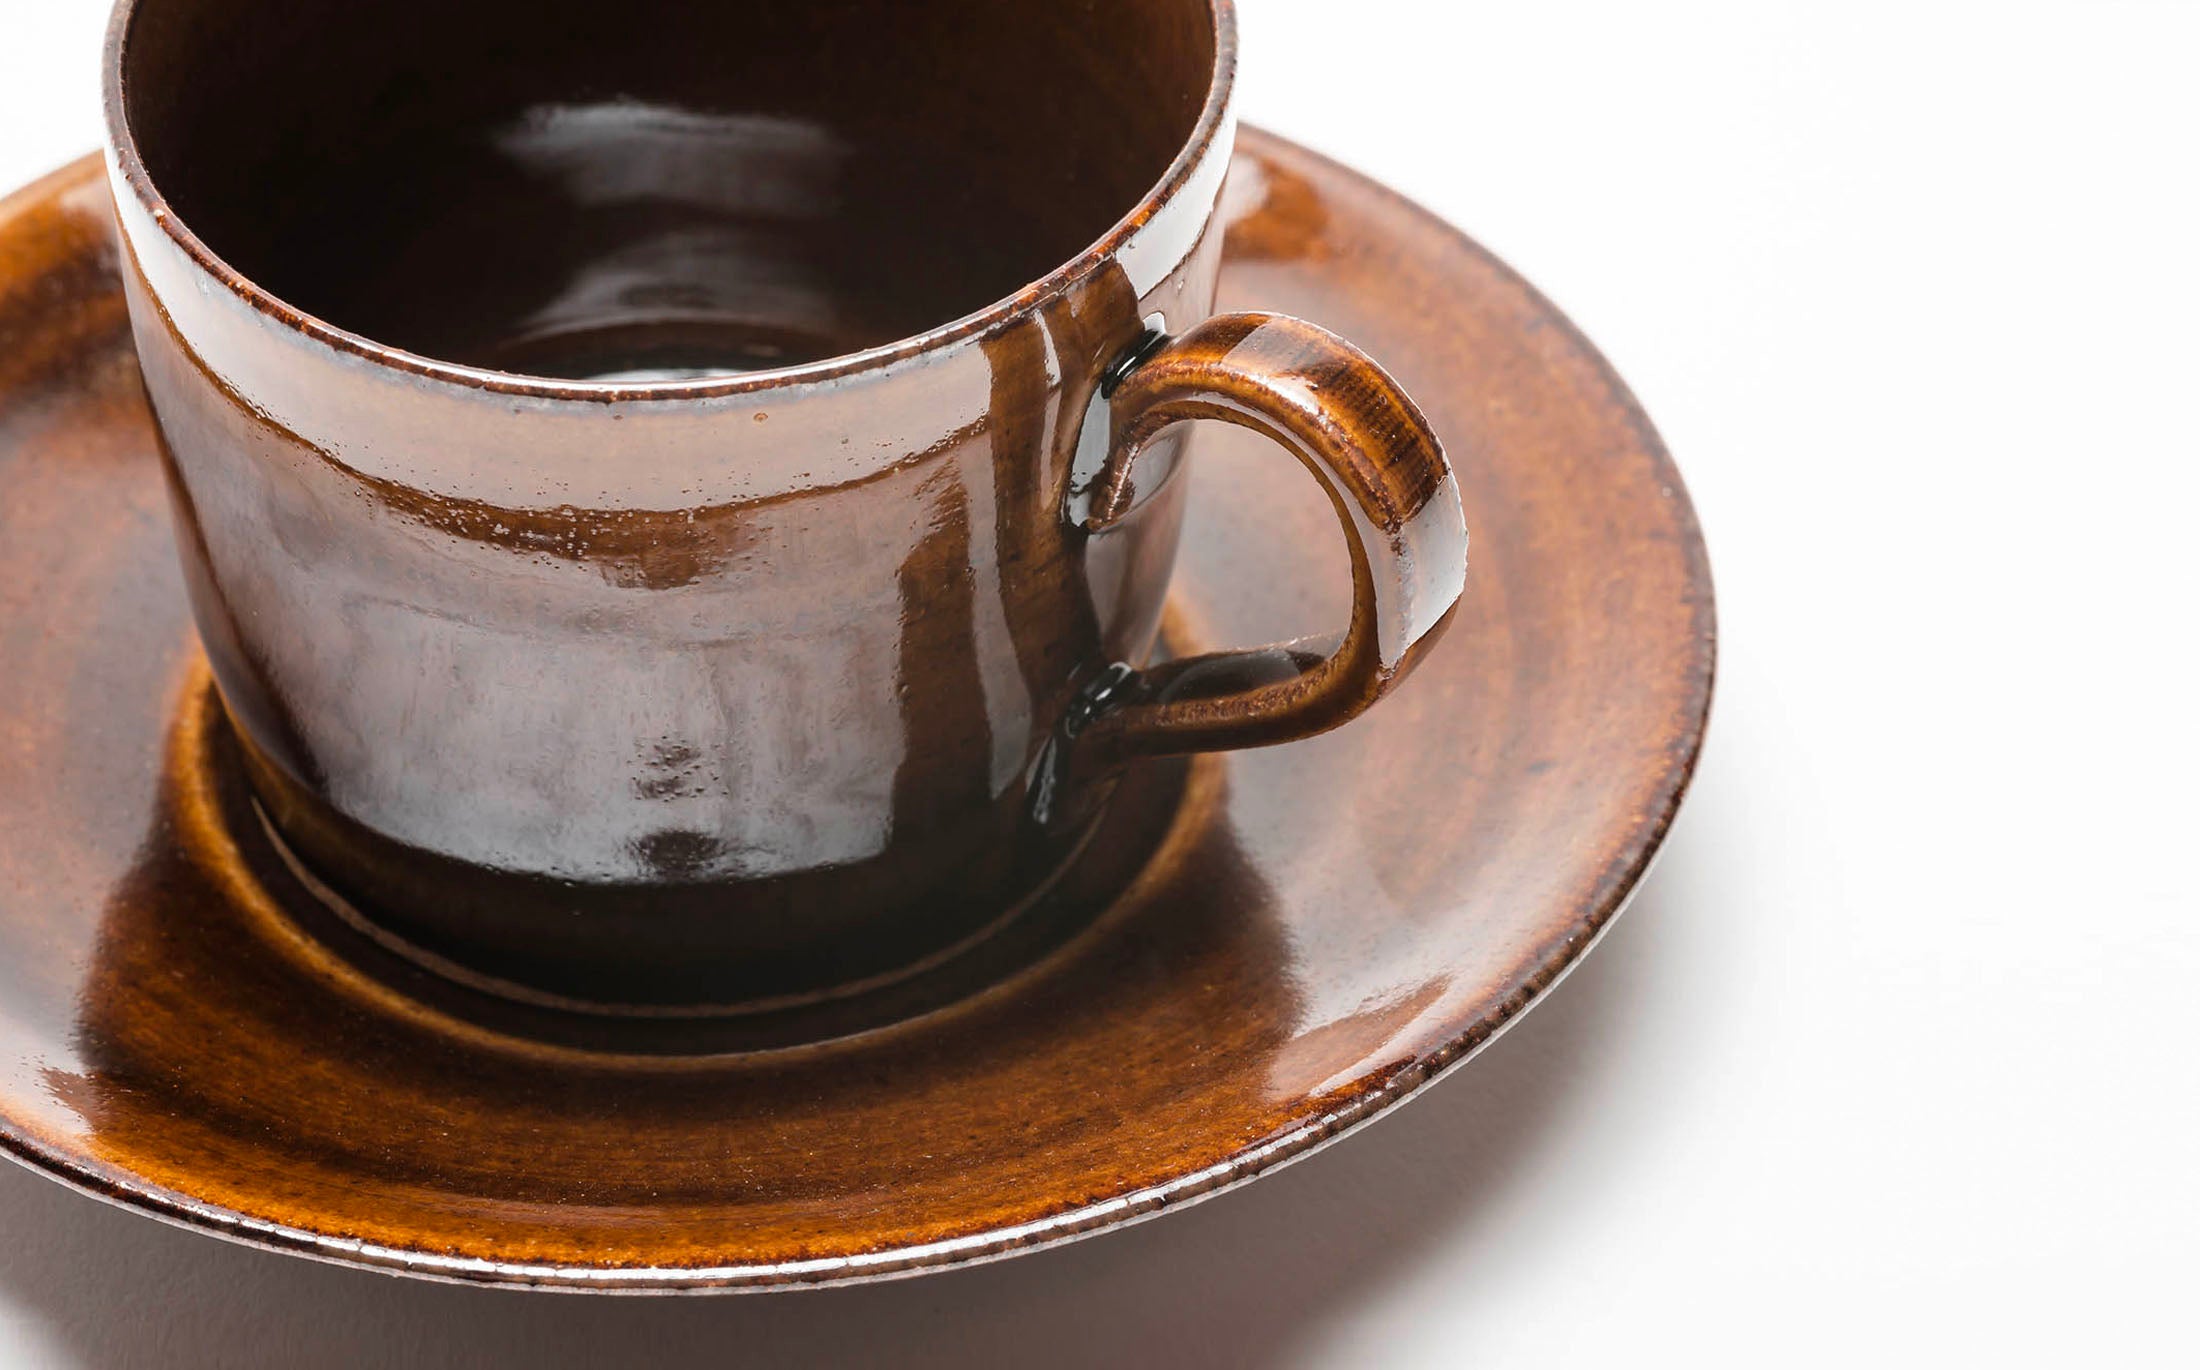 Asayake - Ceramic Brown - Coffee Cup and Saucer